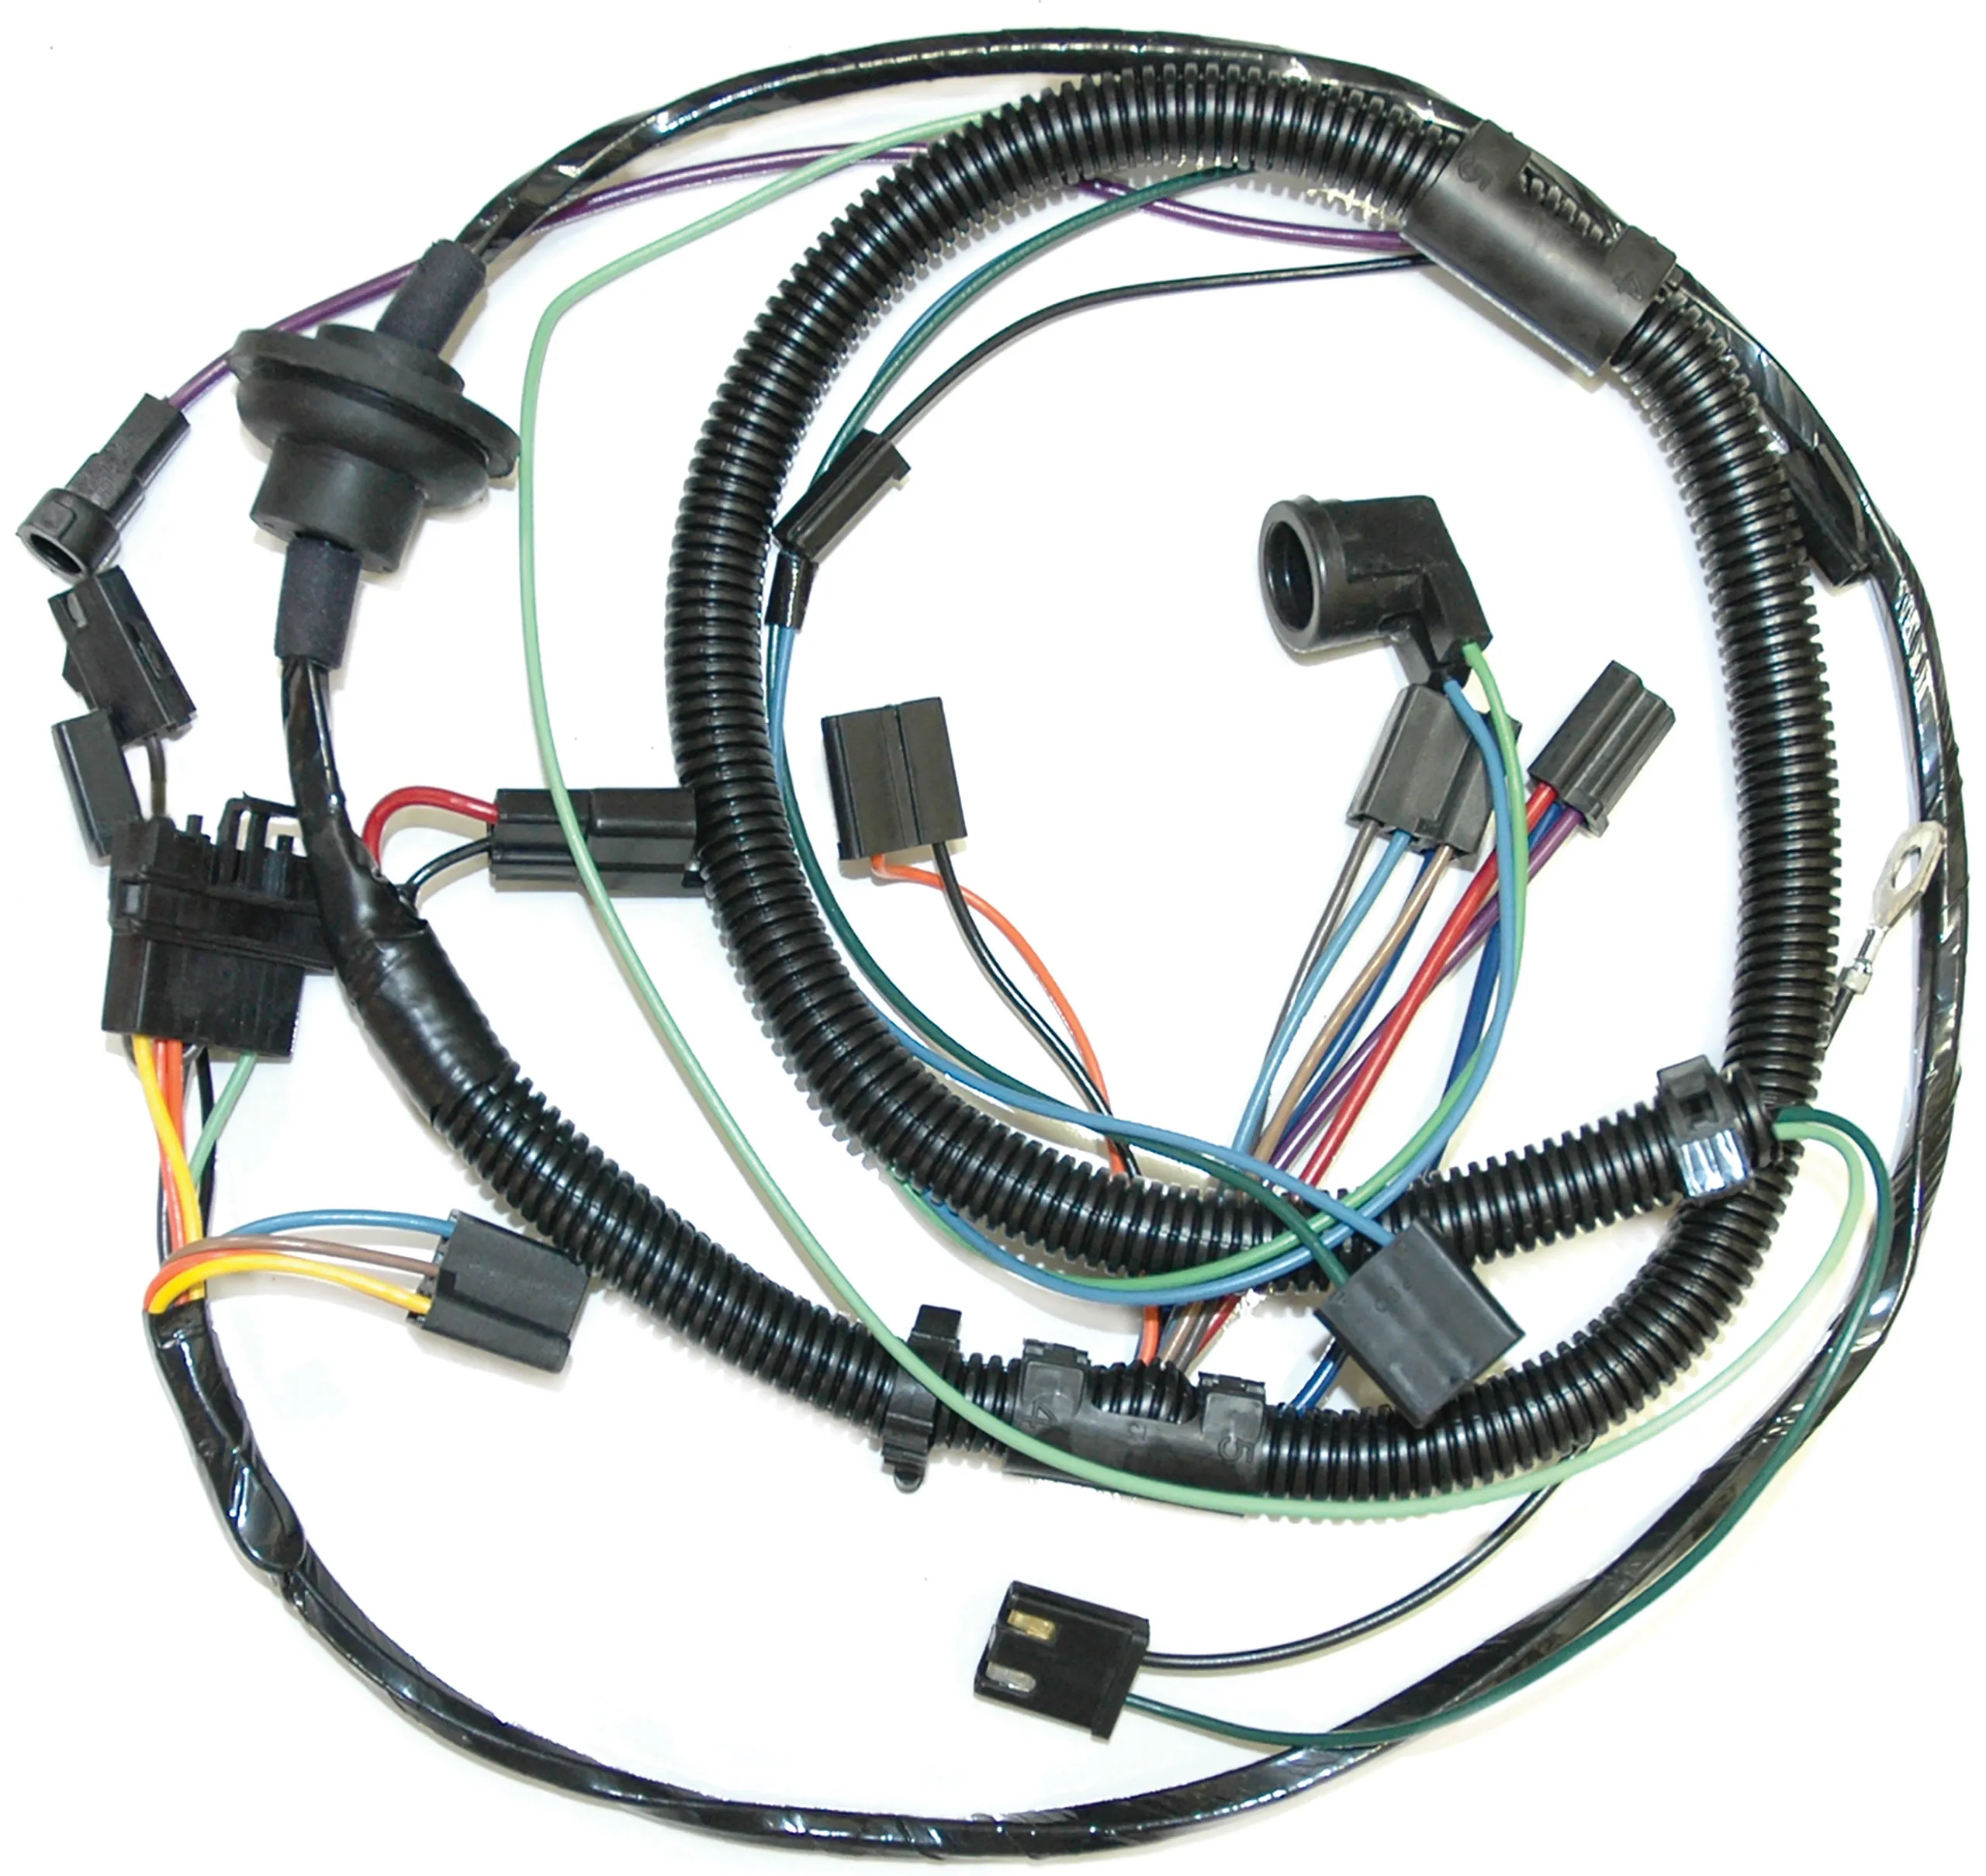 C3 1978 Chevrolet Corvette Harness. Air Conditioning W/Heater Wiring - Lectric Limited, Inc.